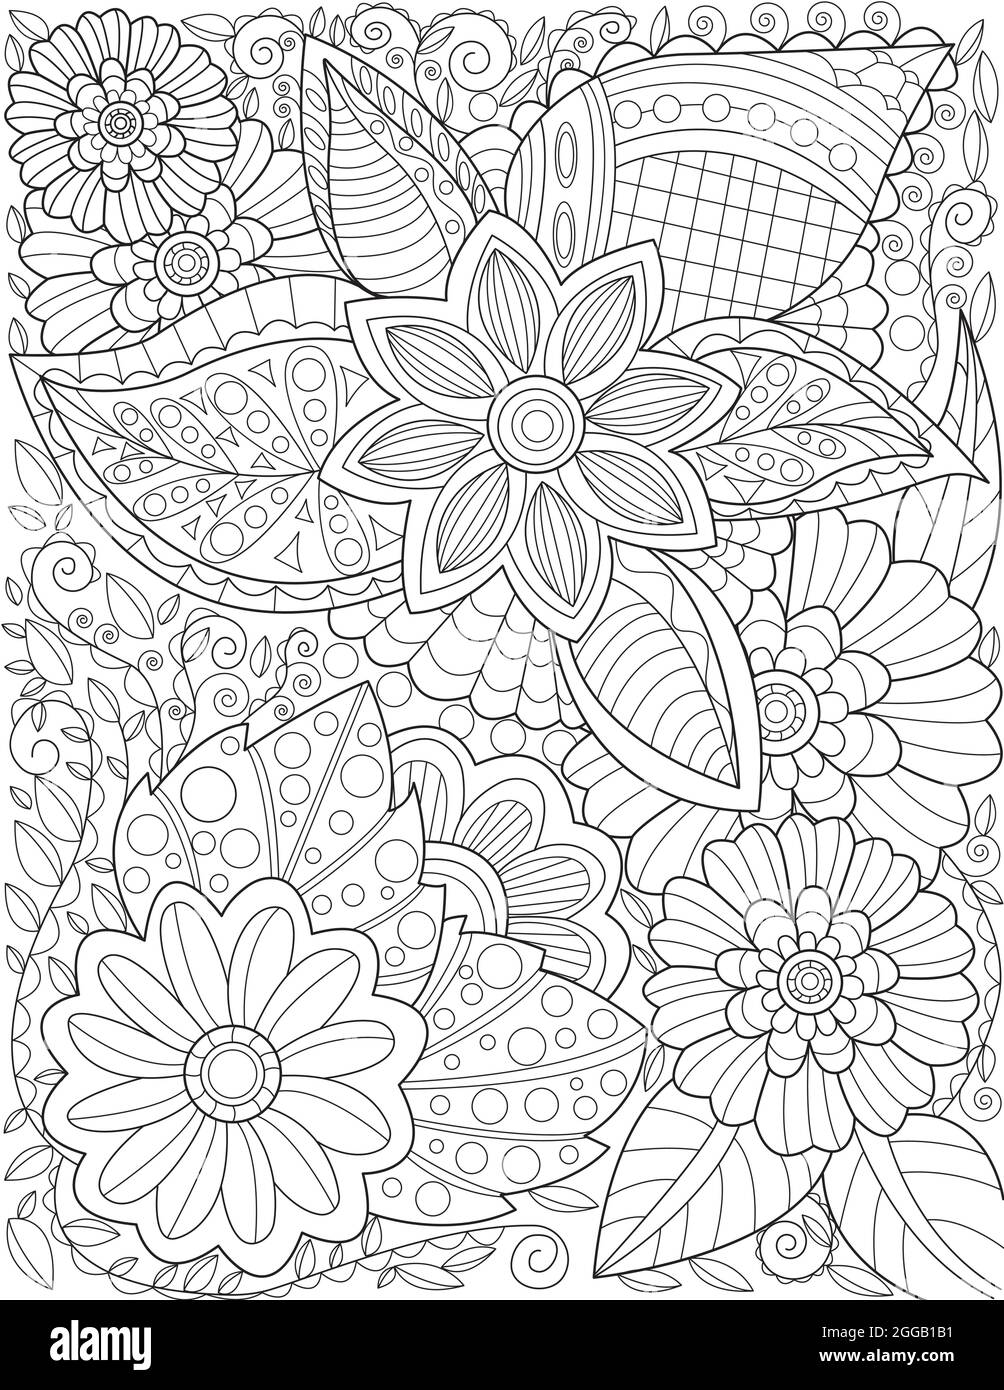 A Beautiful Large Flower Pattern Drawing Growing Slow Surrounded ...